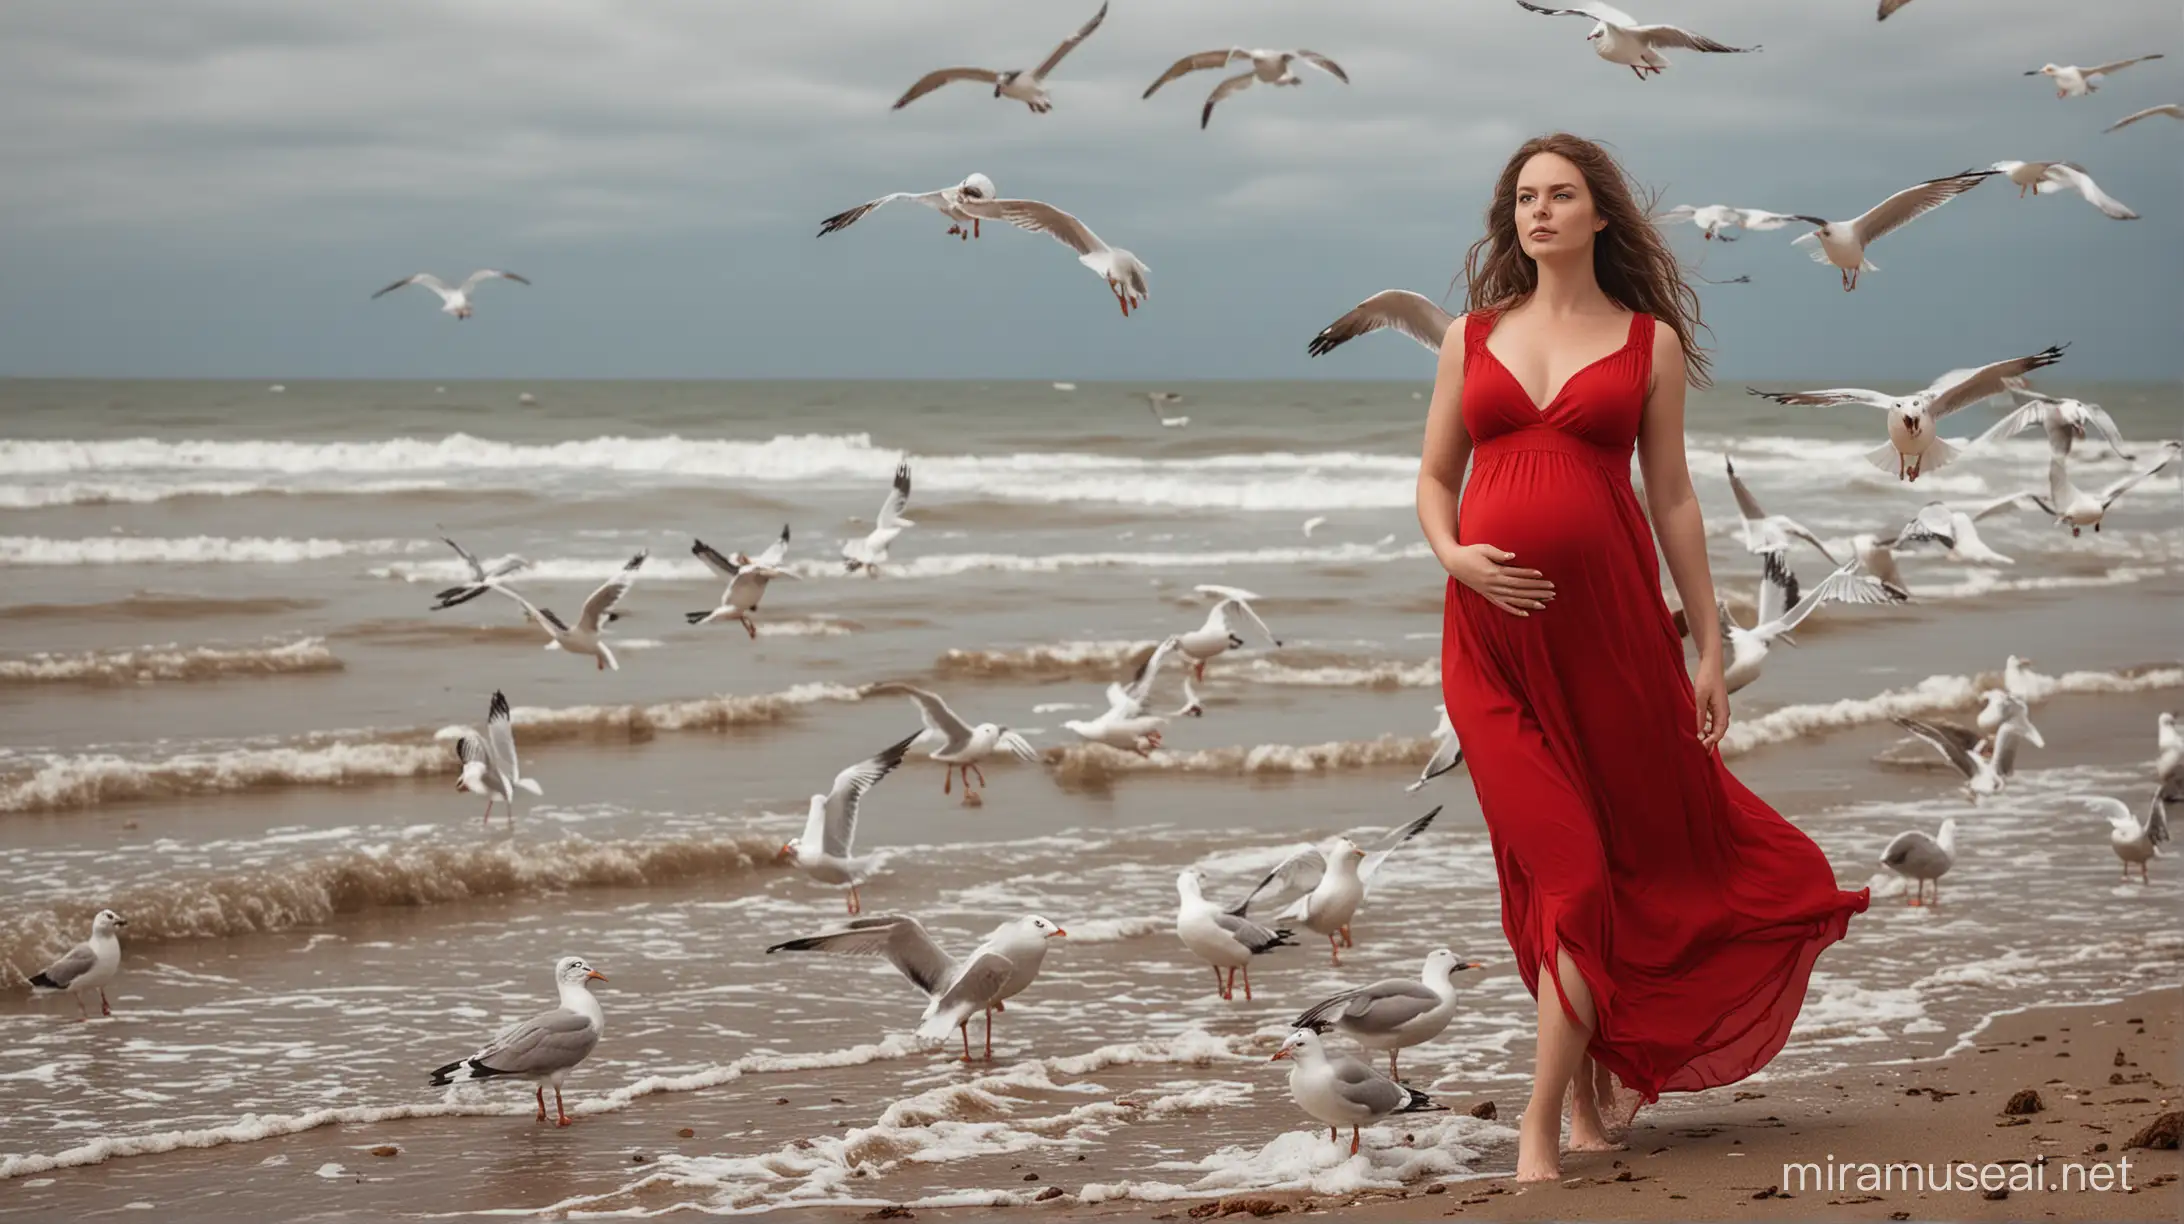 realistic maternity photoset of a girl with blue eyes and brown hair, on a beach, with seagulls flying around her, dressed in a very low-cut and very long red dress that seems to fly